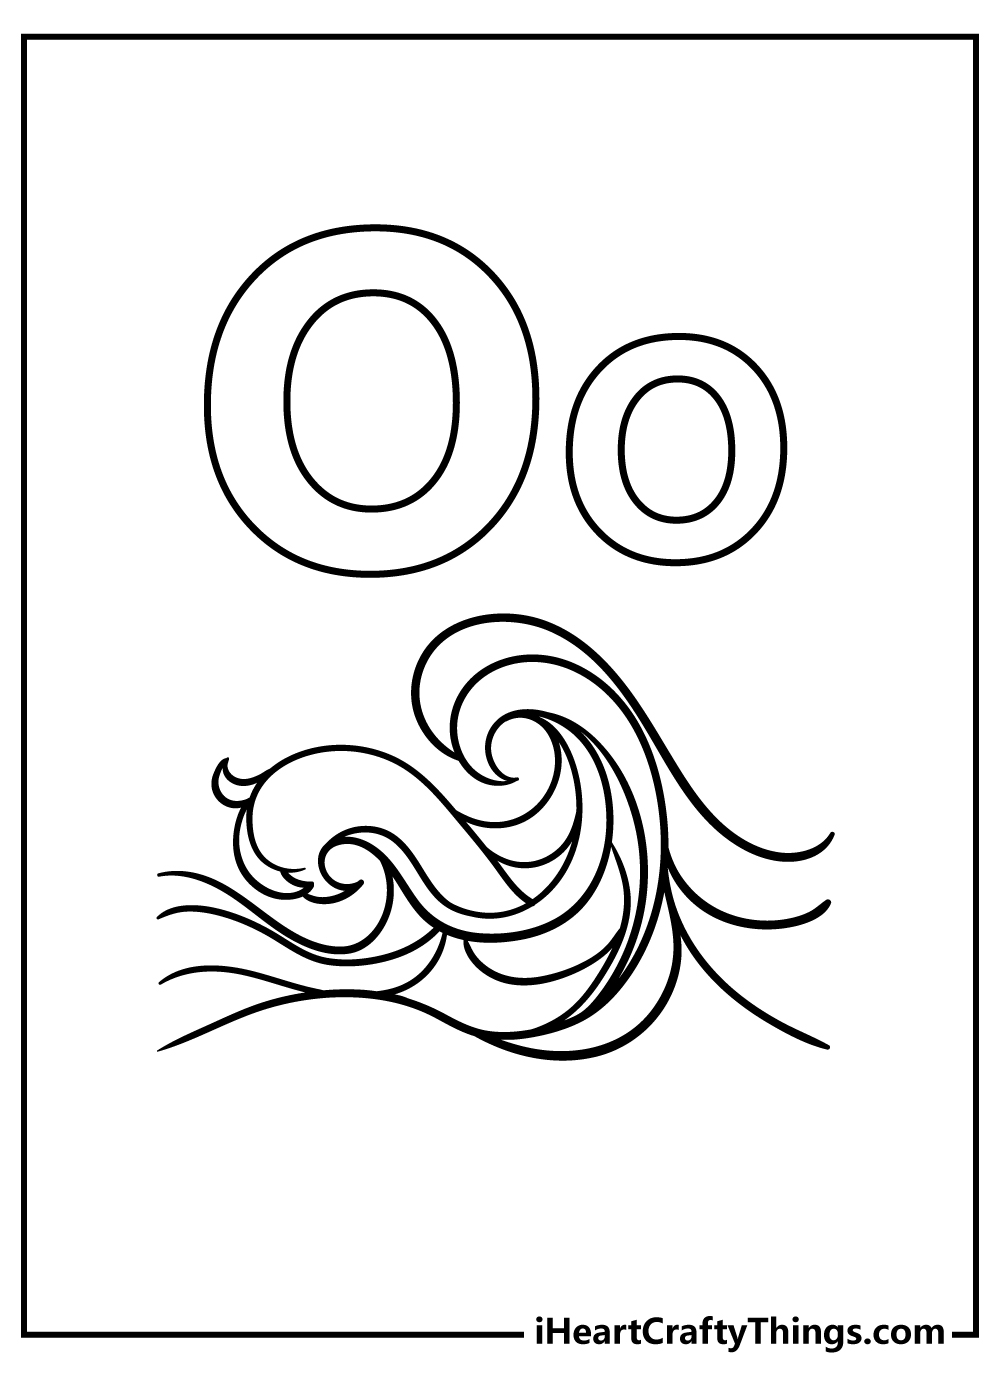 Letter O Coloring Book free printable